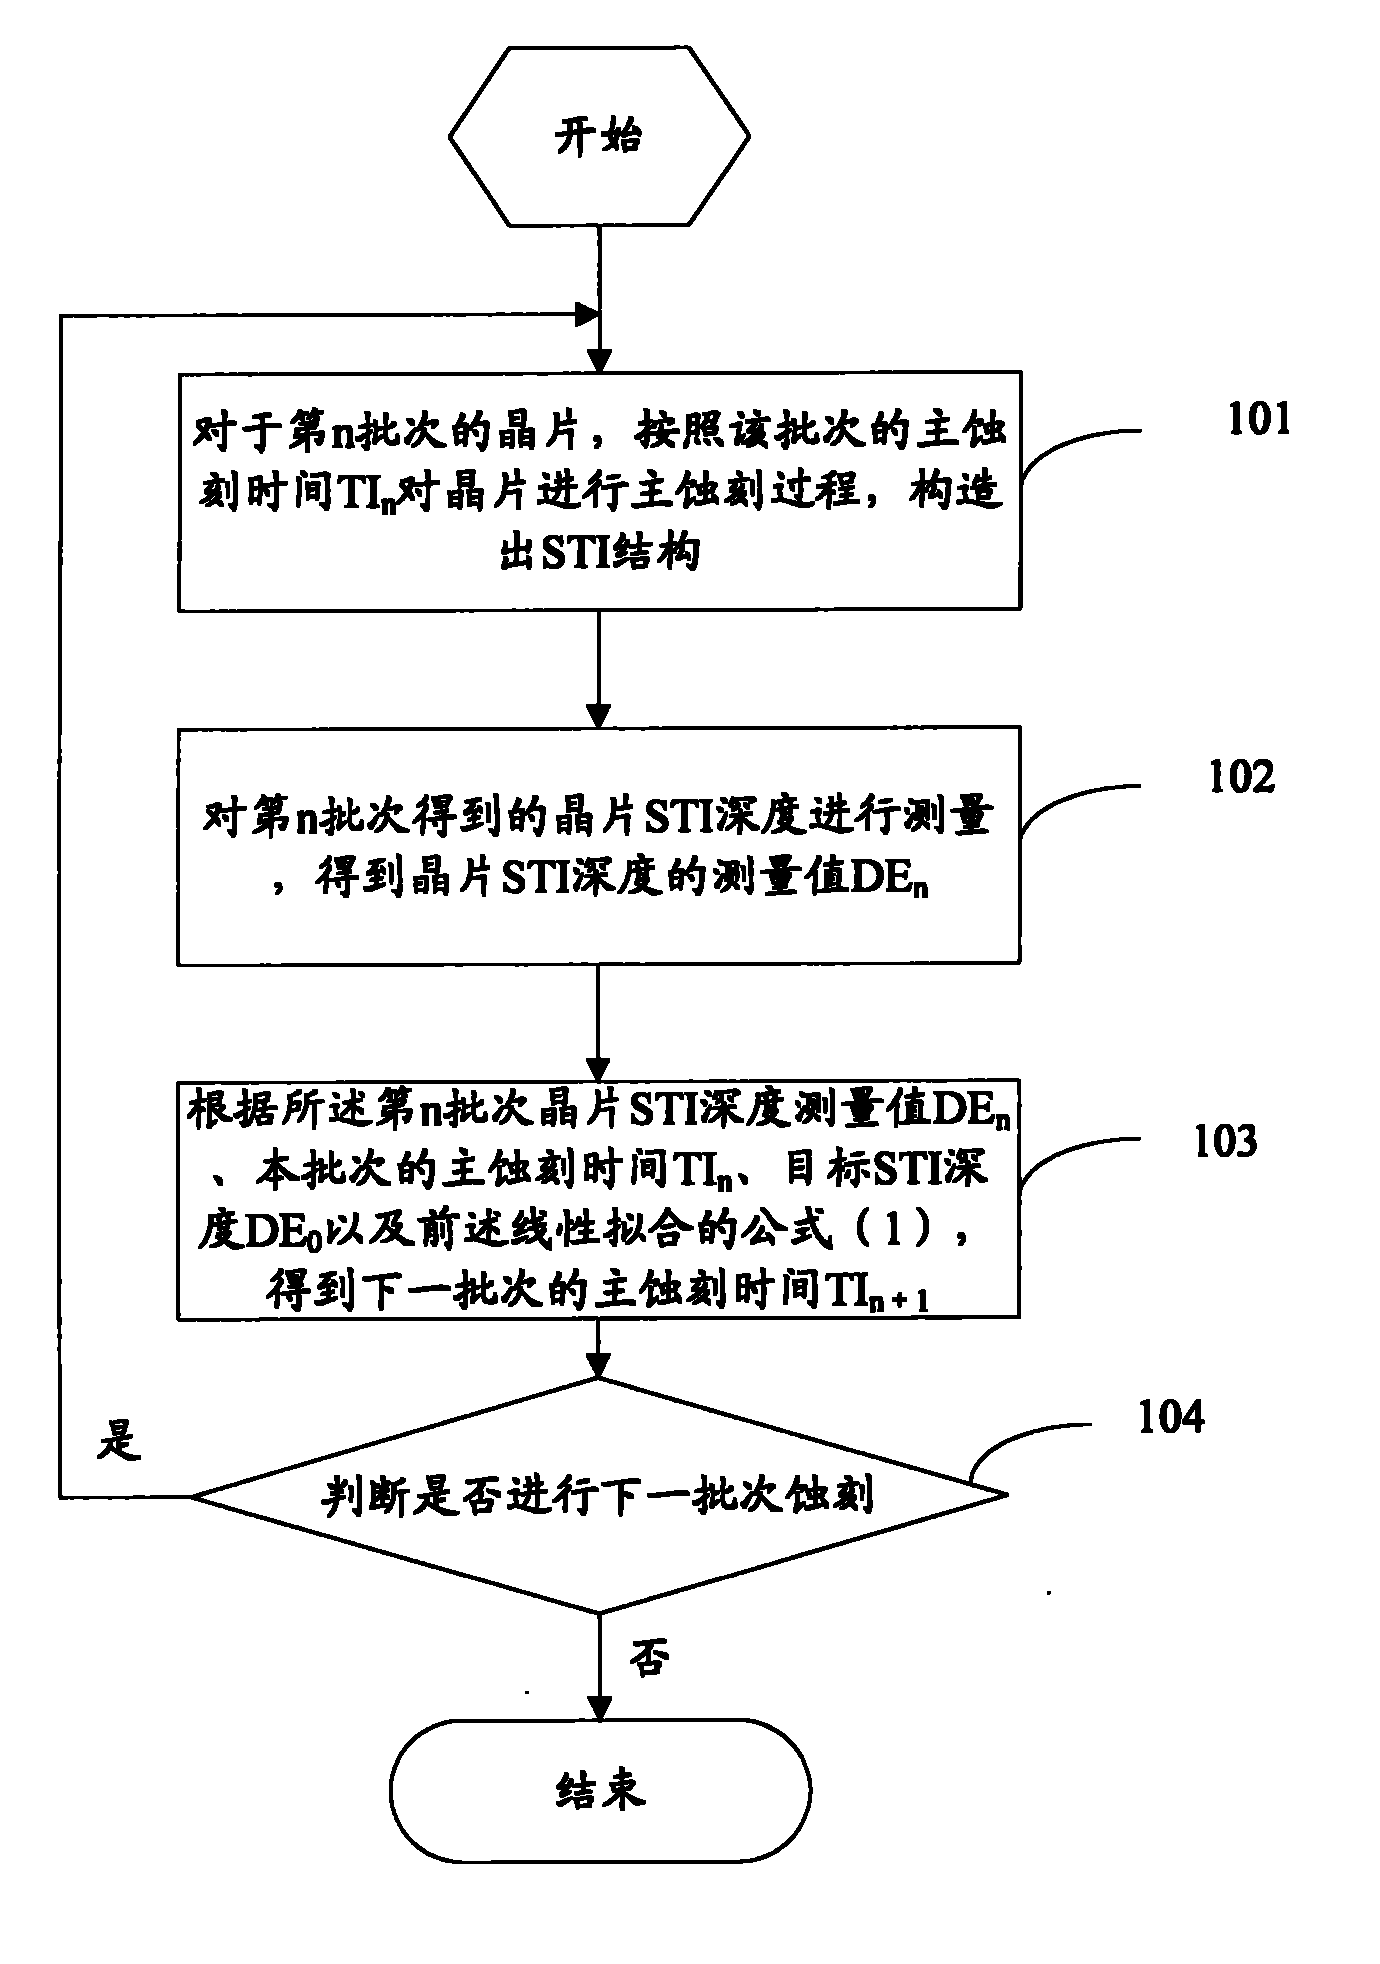 Method for controlling processing process of STI (Shallow Trench Isolation) channel of wafer